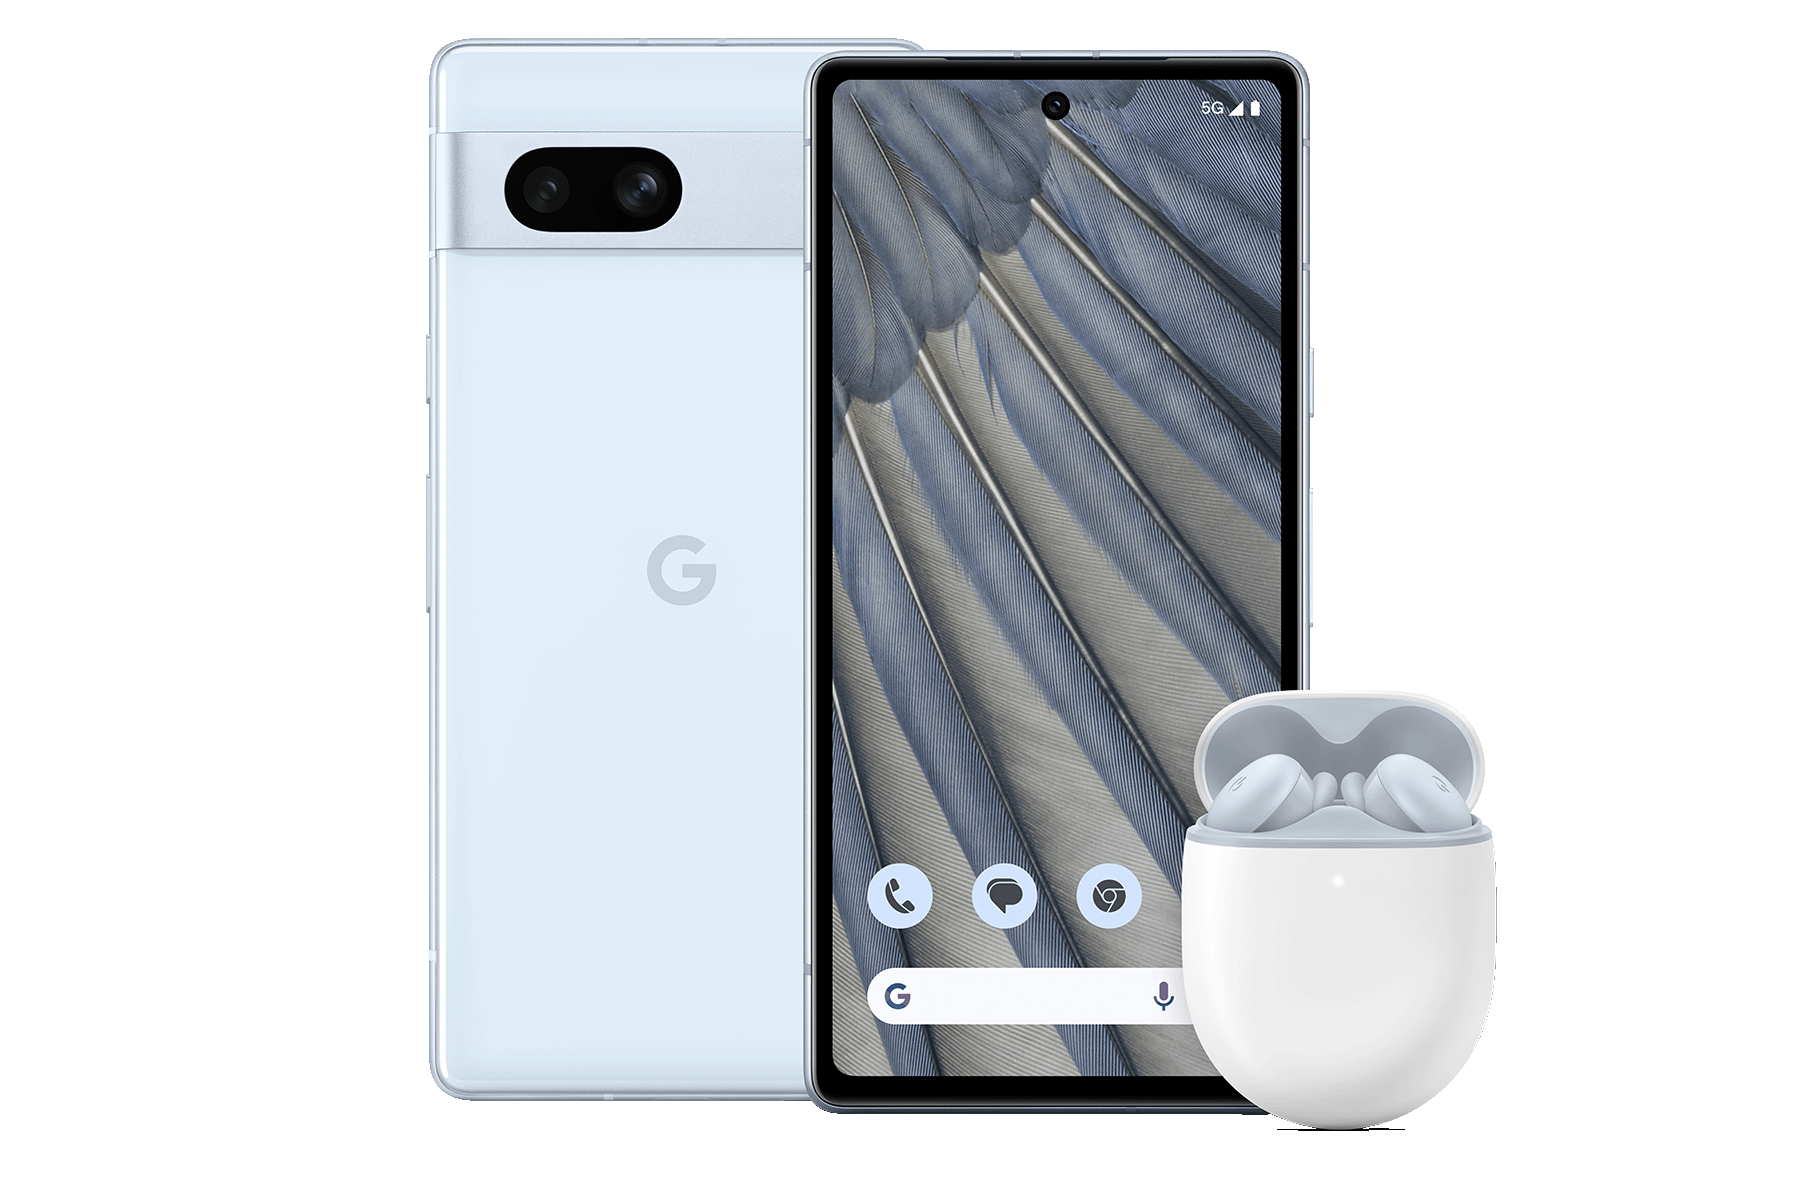 The new Google Pixel 7a is now available on Vodafone EVO